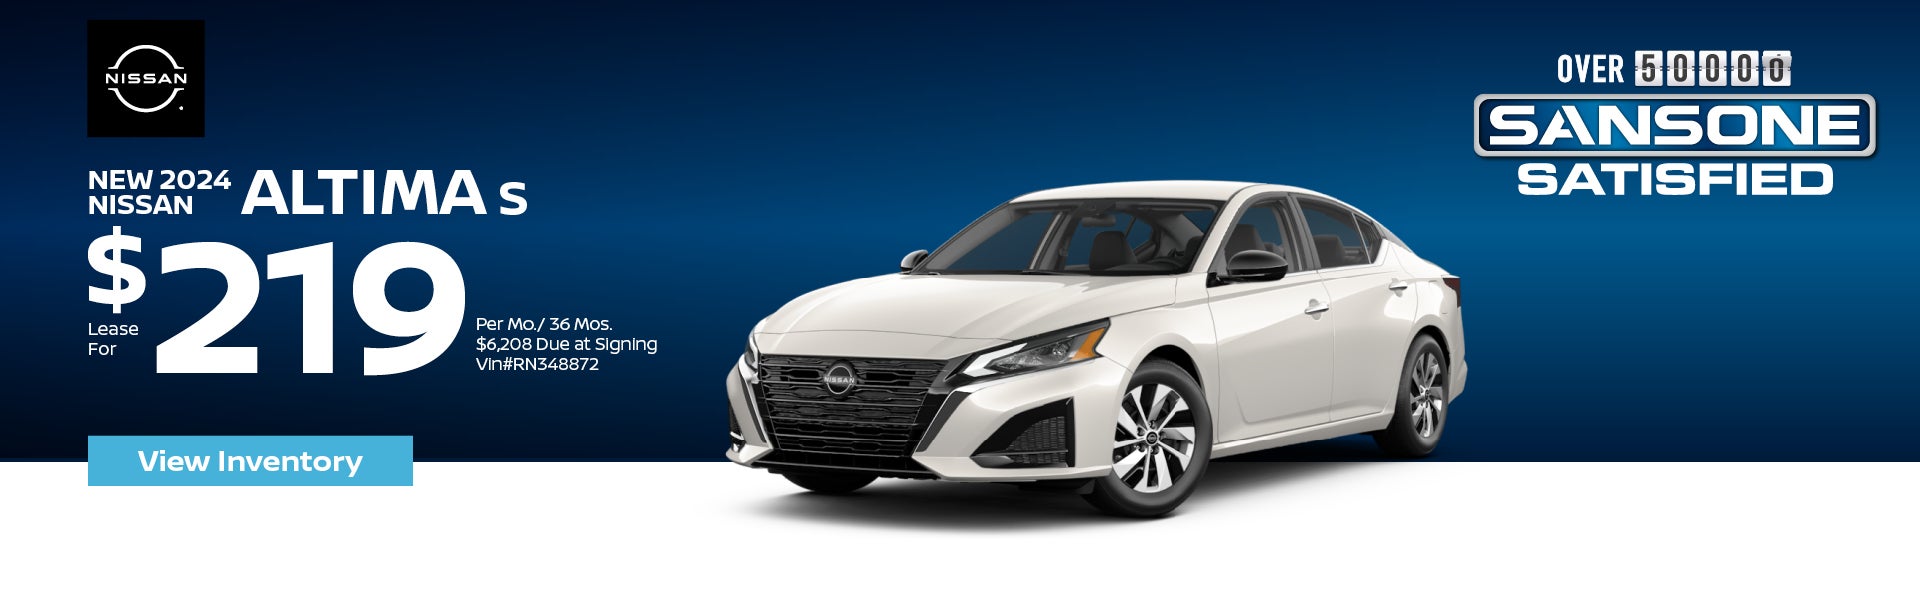 2024 Altima Lease Offer